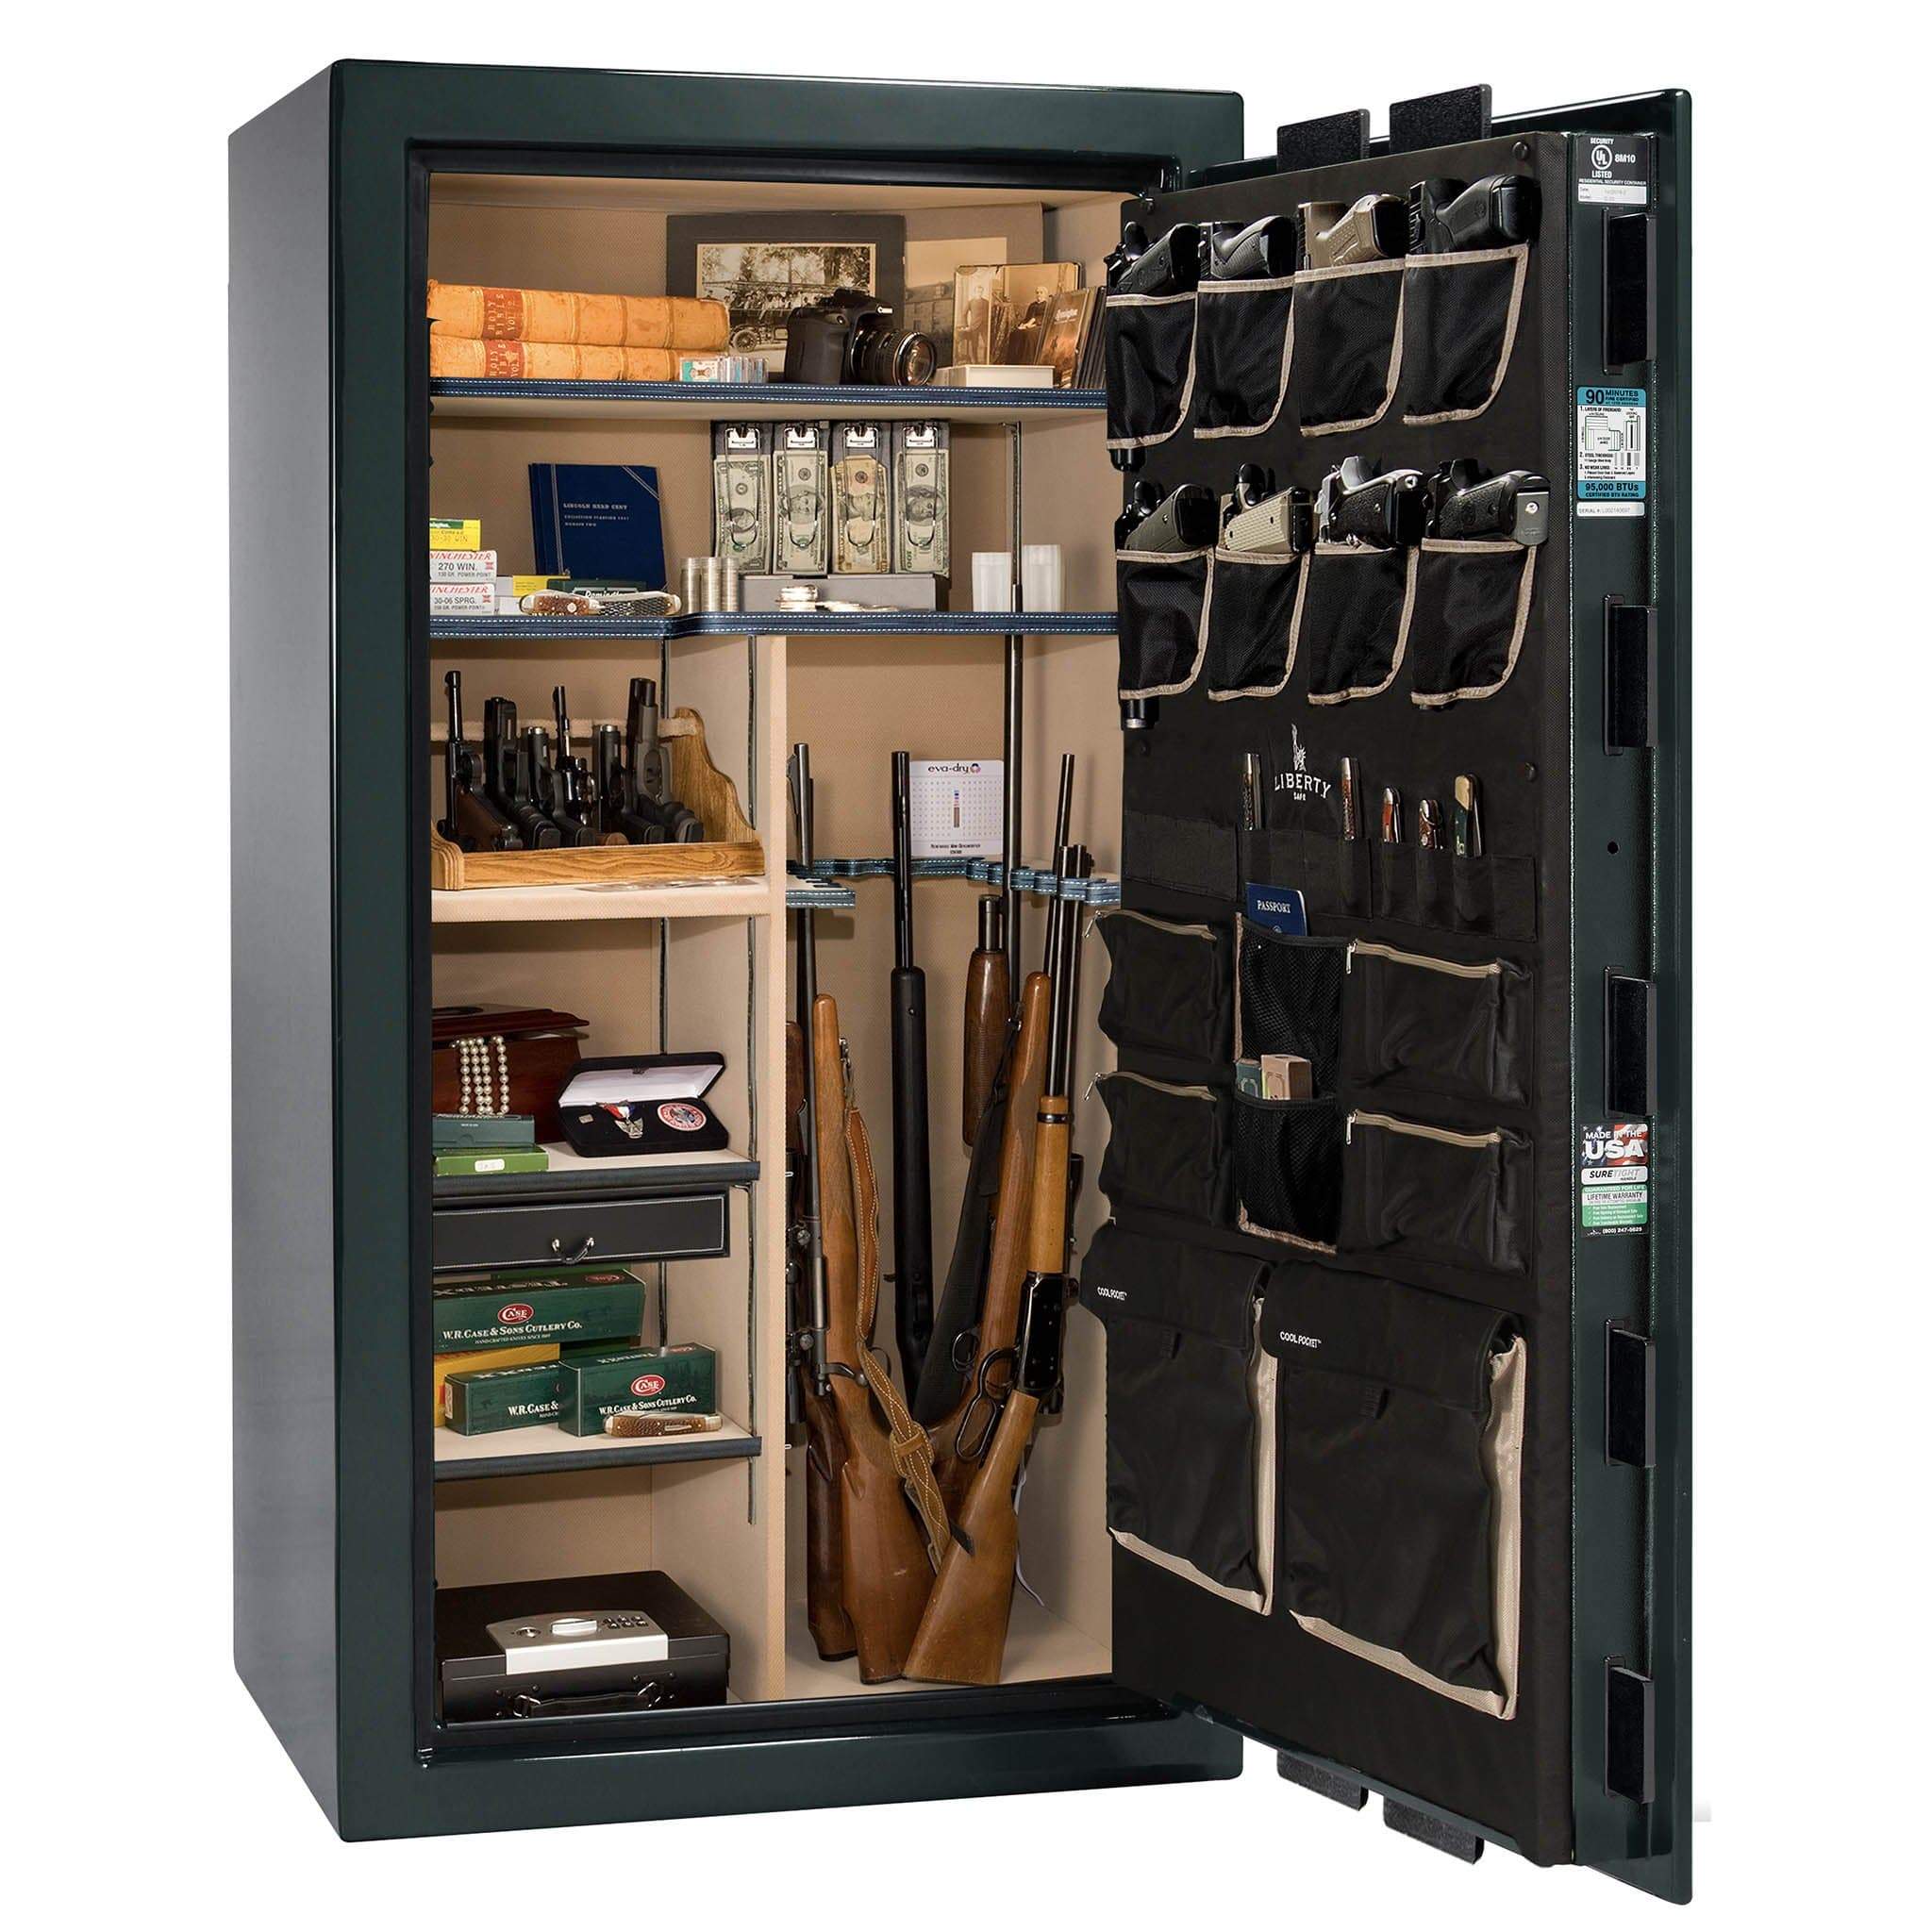 Blog of Aaron J.: Fire Protection Requirements for Rack Storage